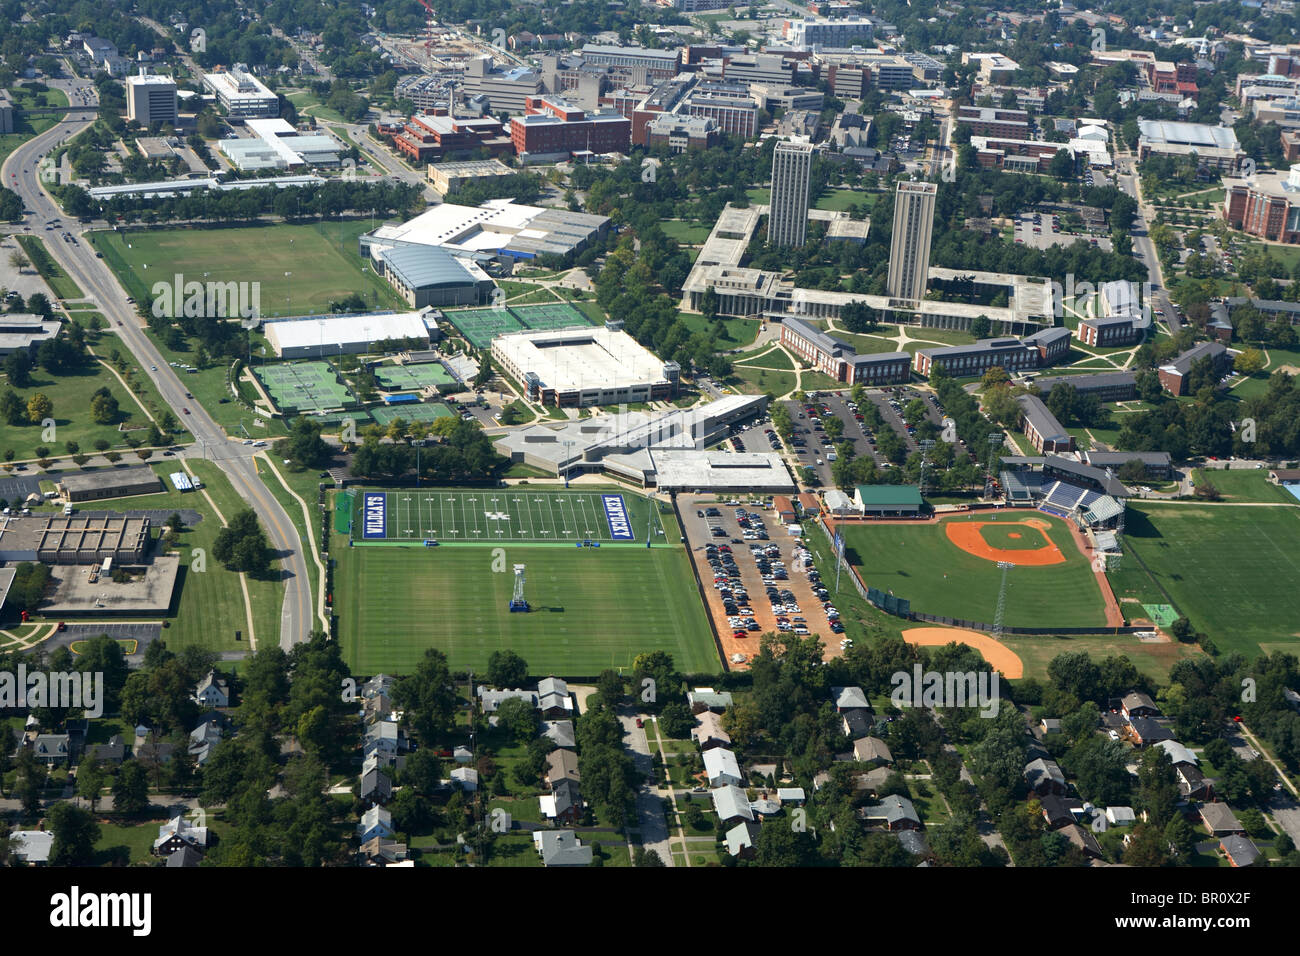 Aerial view of some of the university of Kentucky campus and athletic facilities in Lexington, KY. Stock Photo